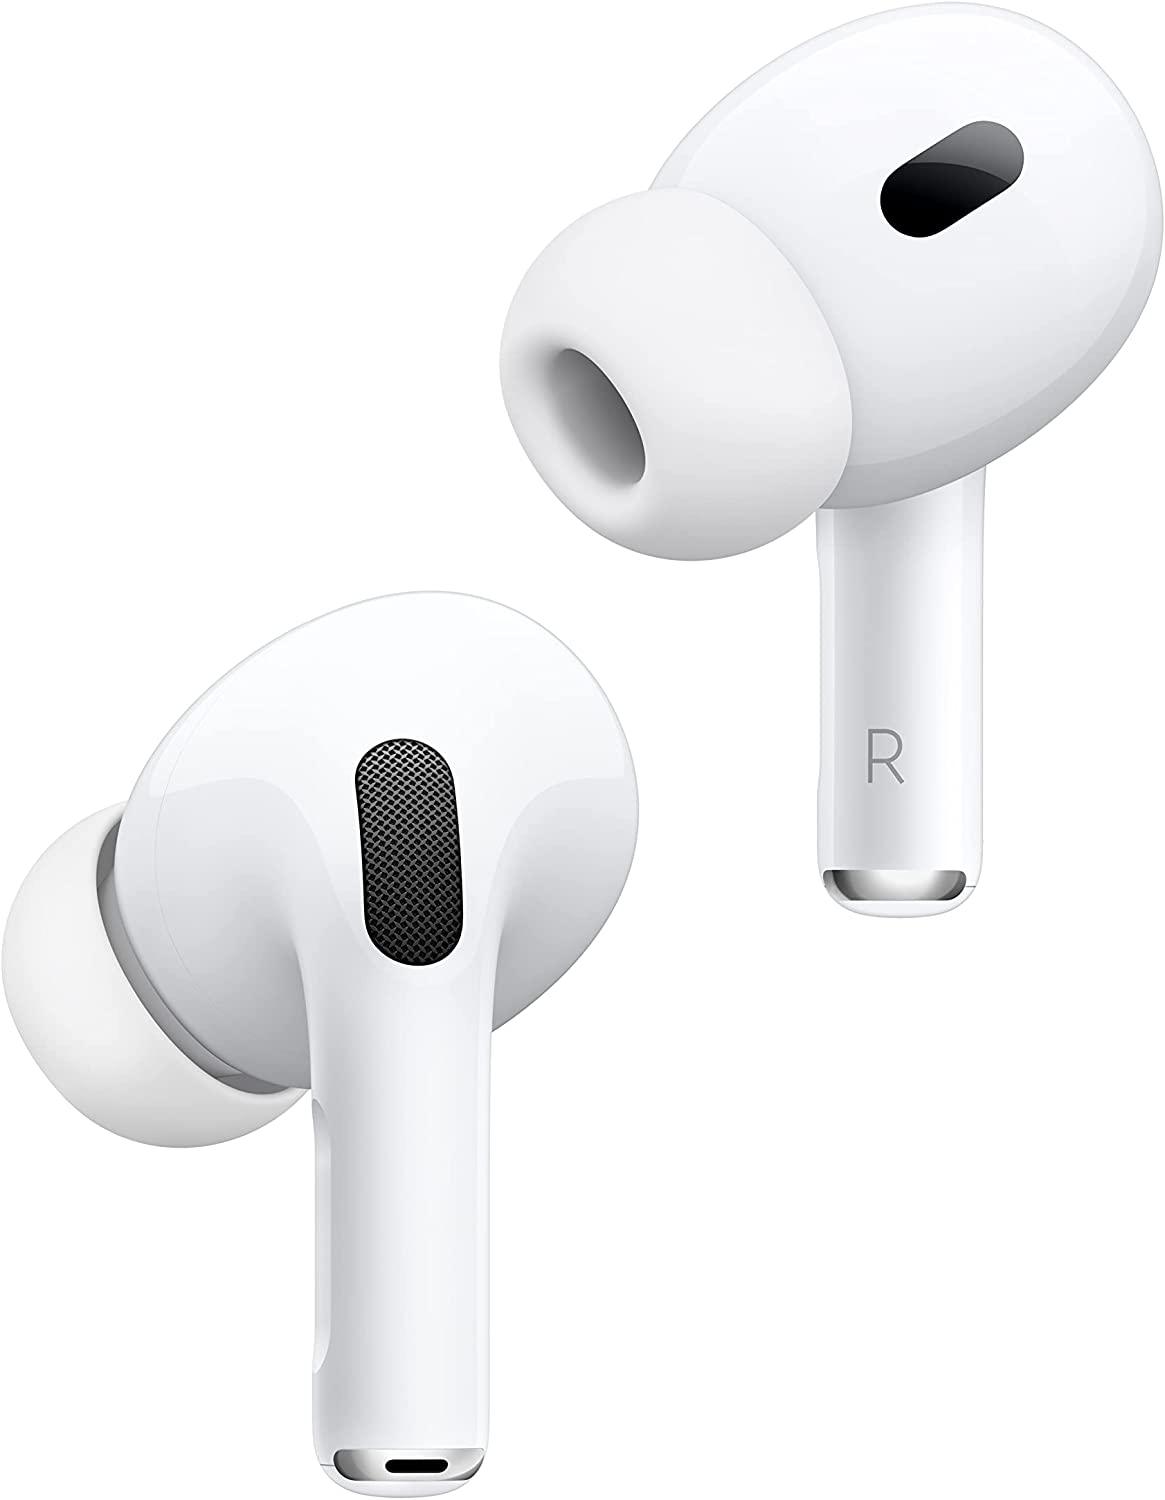 Apple AirPods Pro 2nd Generation Wireless Earbuds with MagSafe Charging Case (Renewed) - CADEAUME